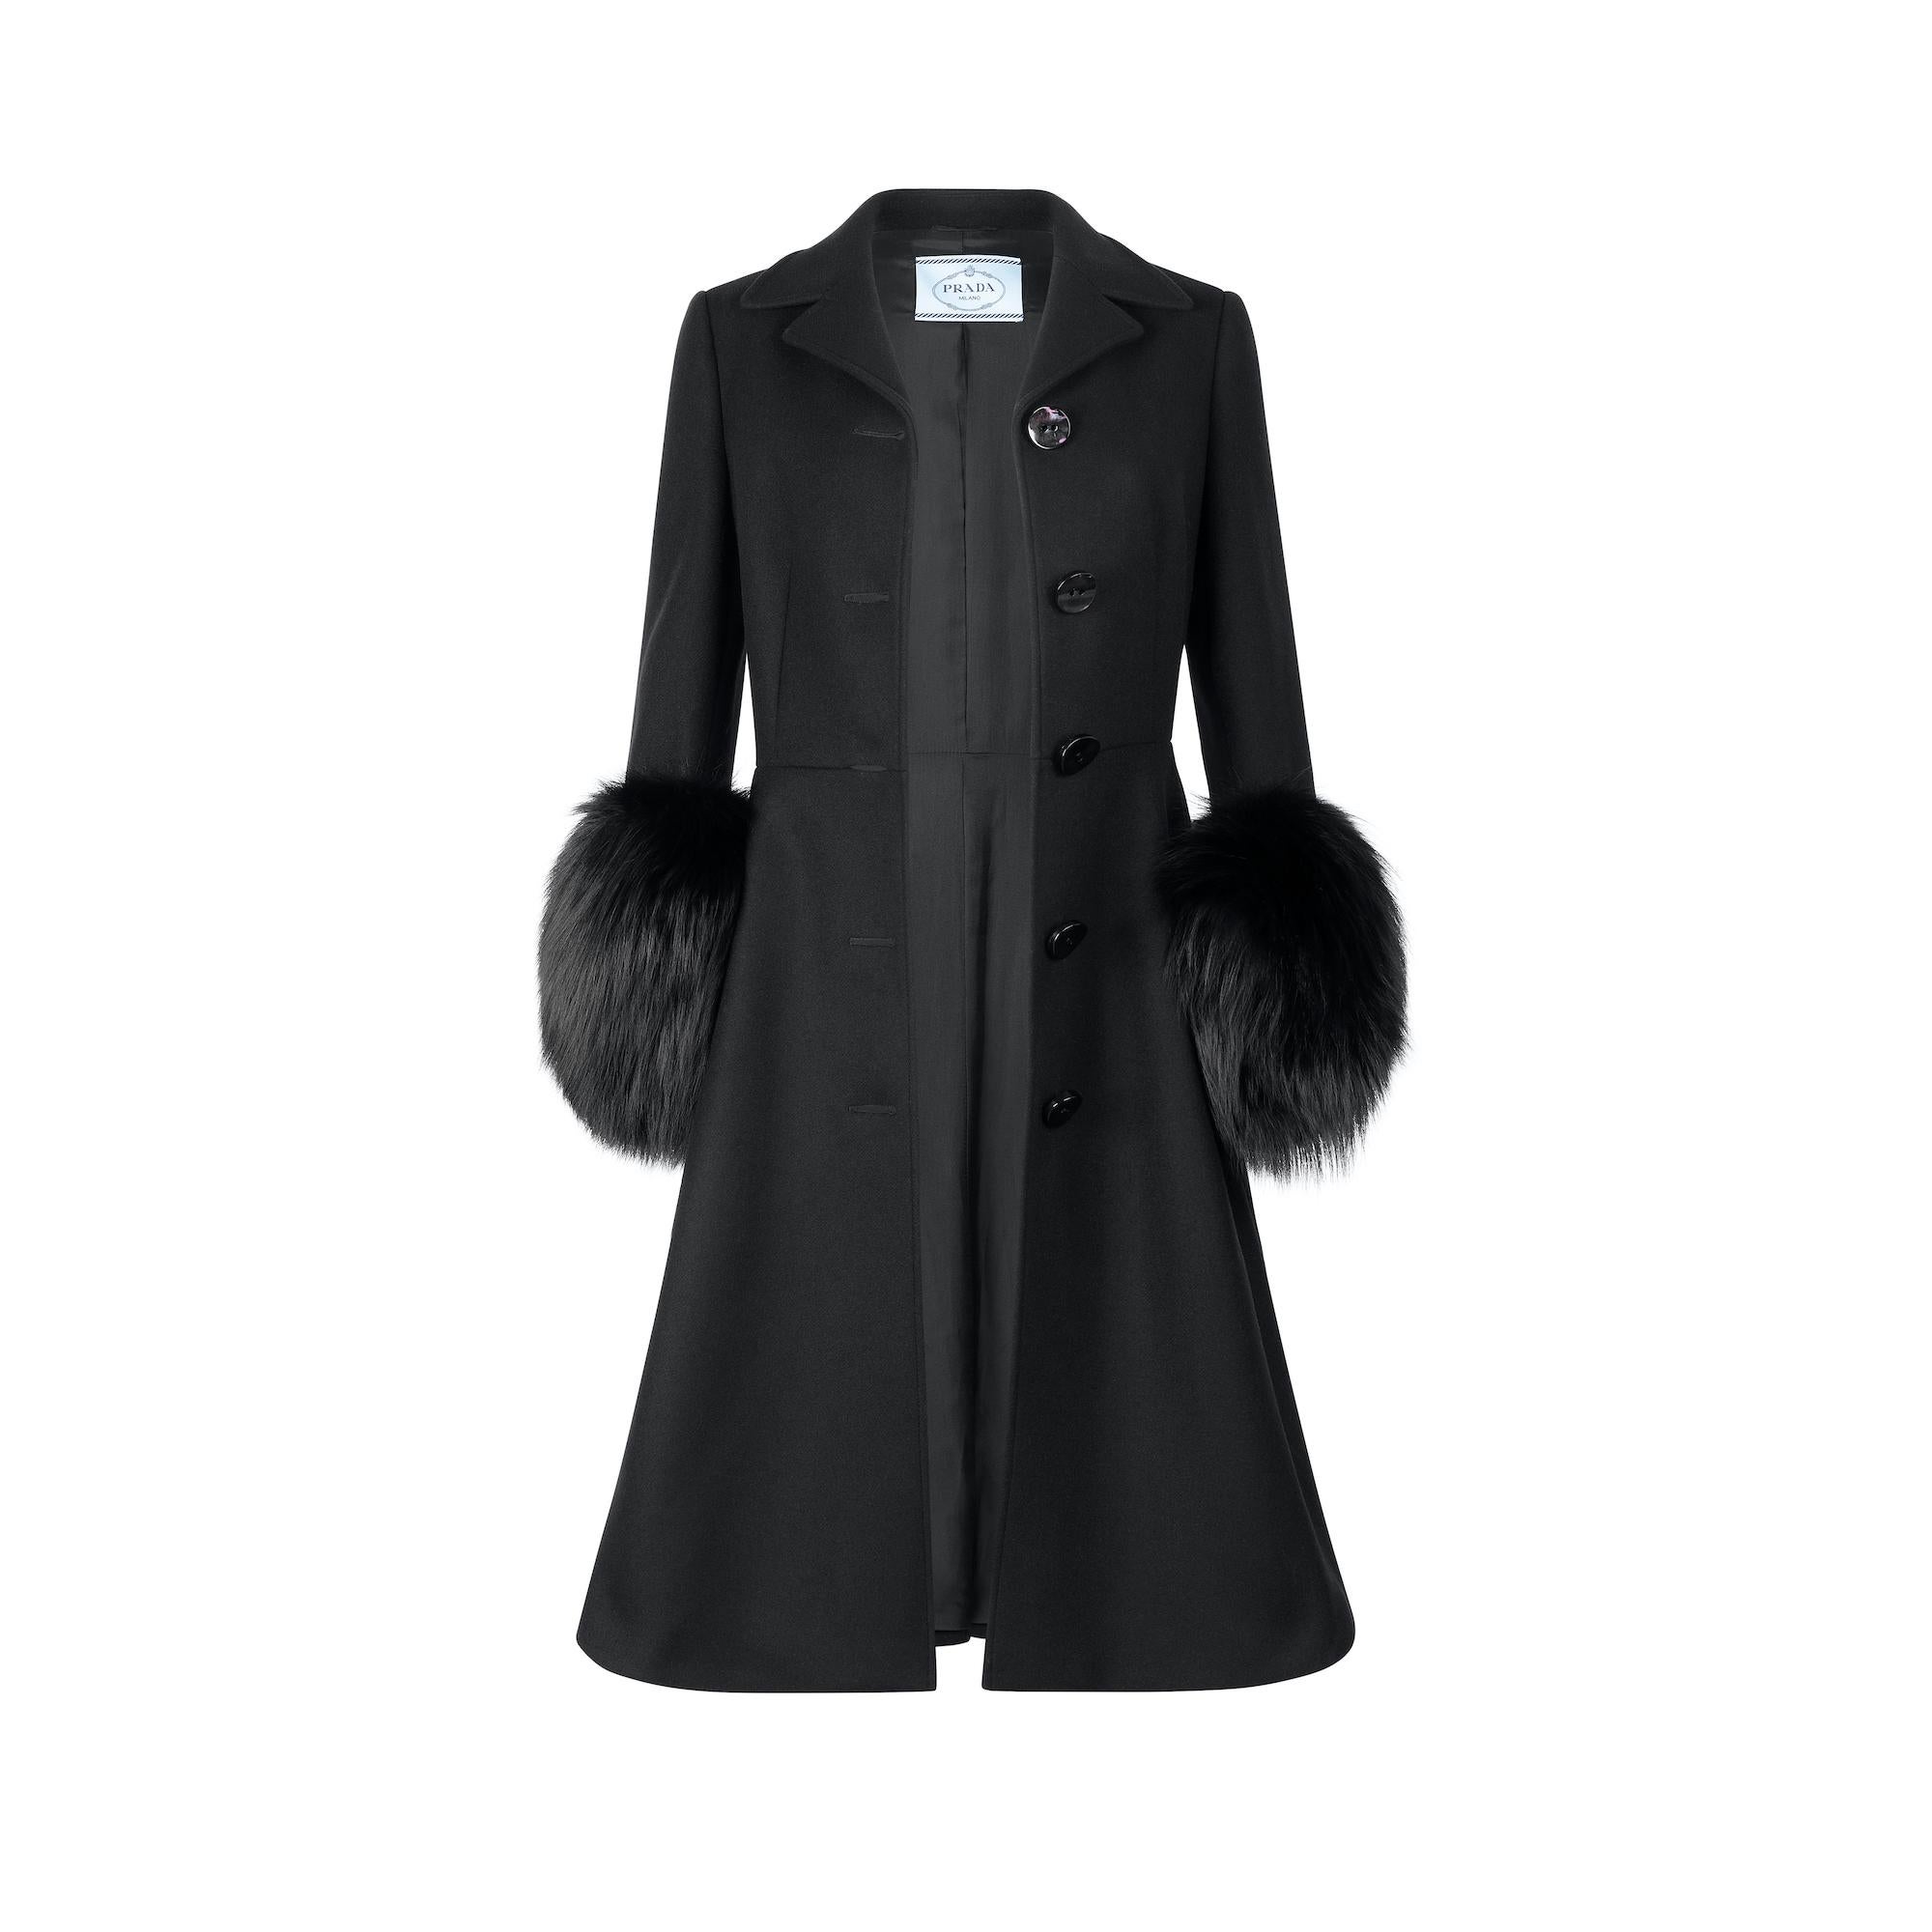 Prada Black Coat with Cuffs In Excellent Condition For Sale In London, GB